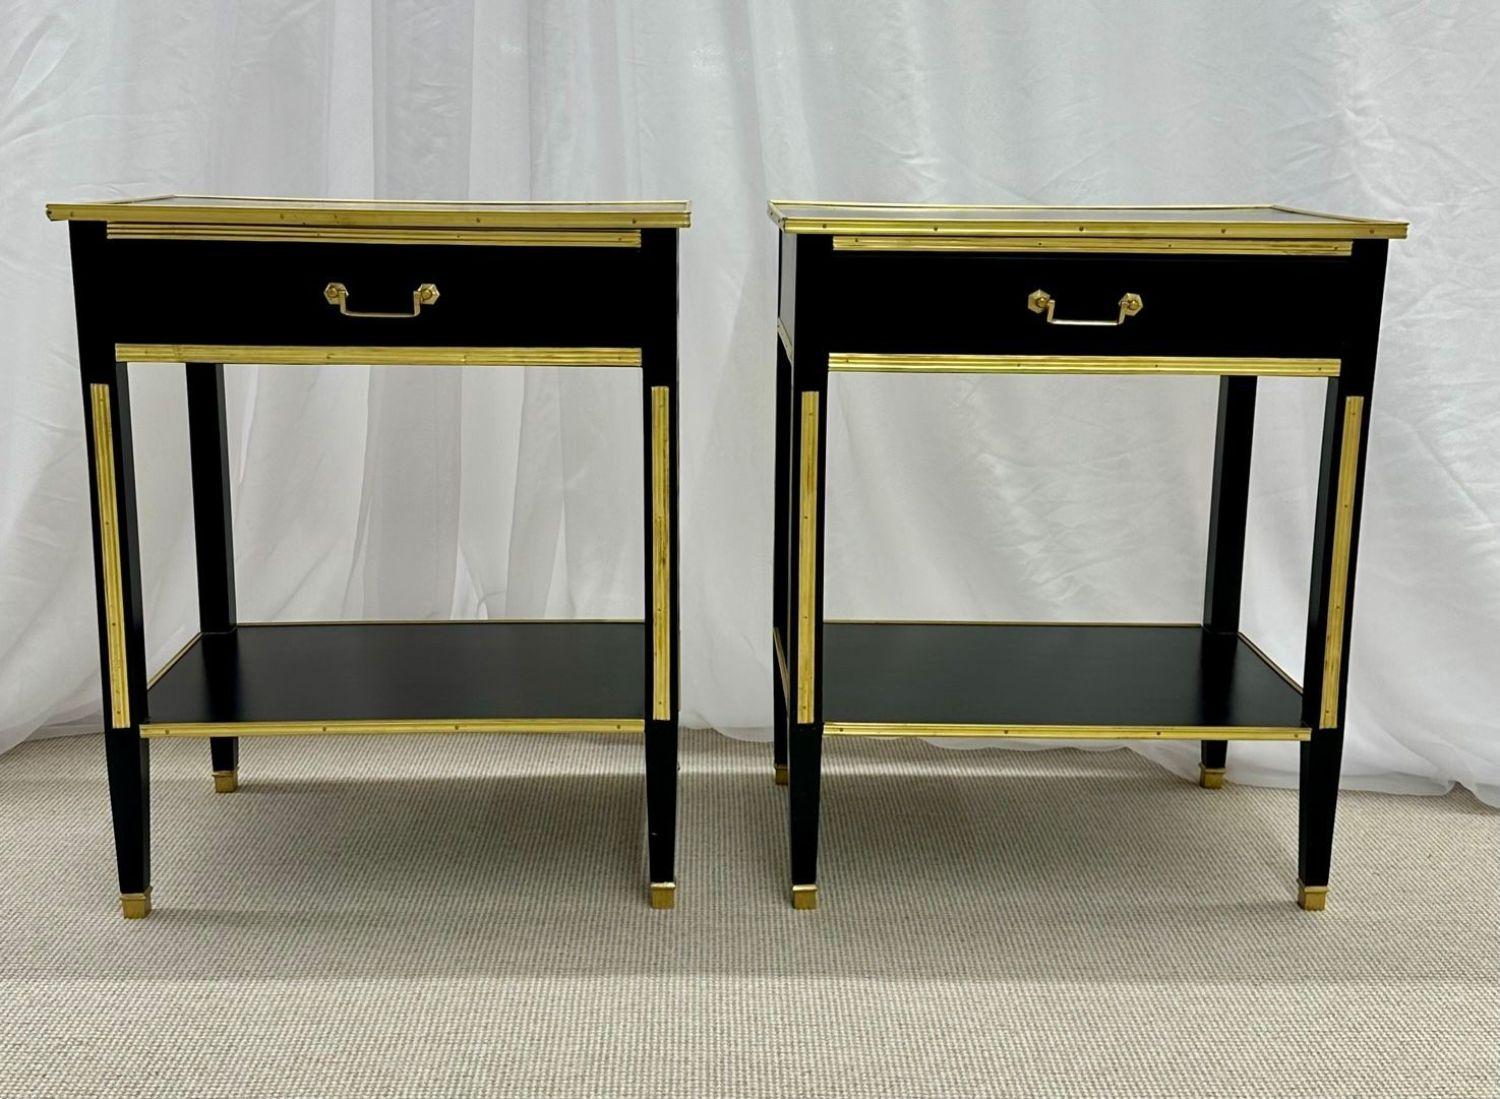 Pair of ebony end / side tables, night tables, Maison Jansen Style, Hollywood Regency. 

Pair of one drawer Russian style bronze-mounted end tables or night stands. Having been professionally polished and touched up this fine pair of Russian